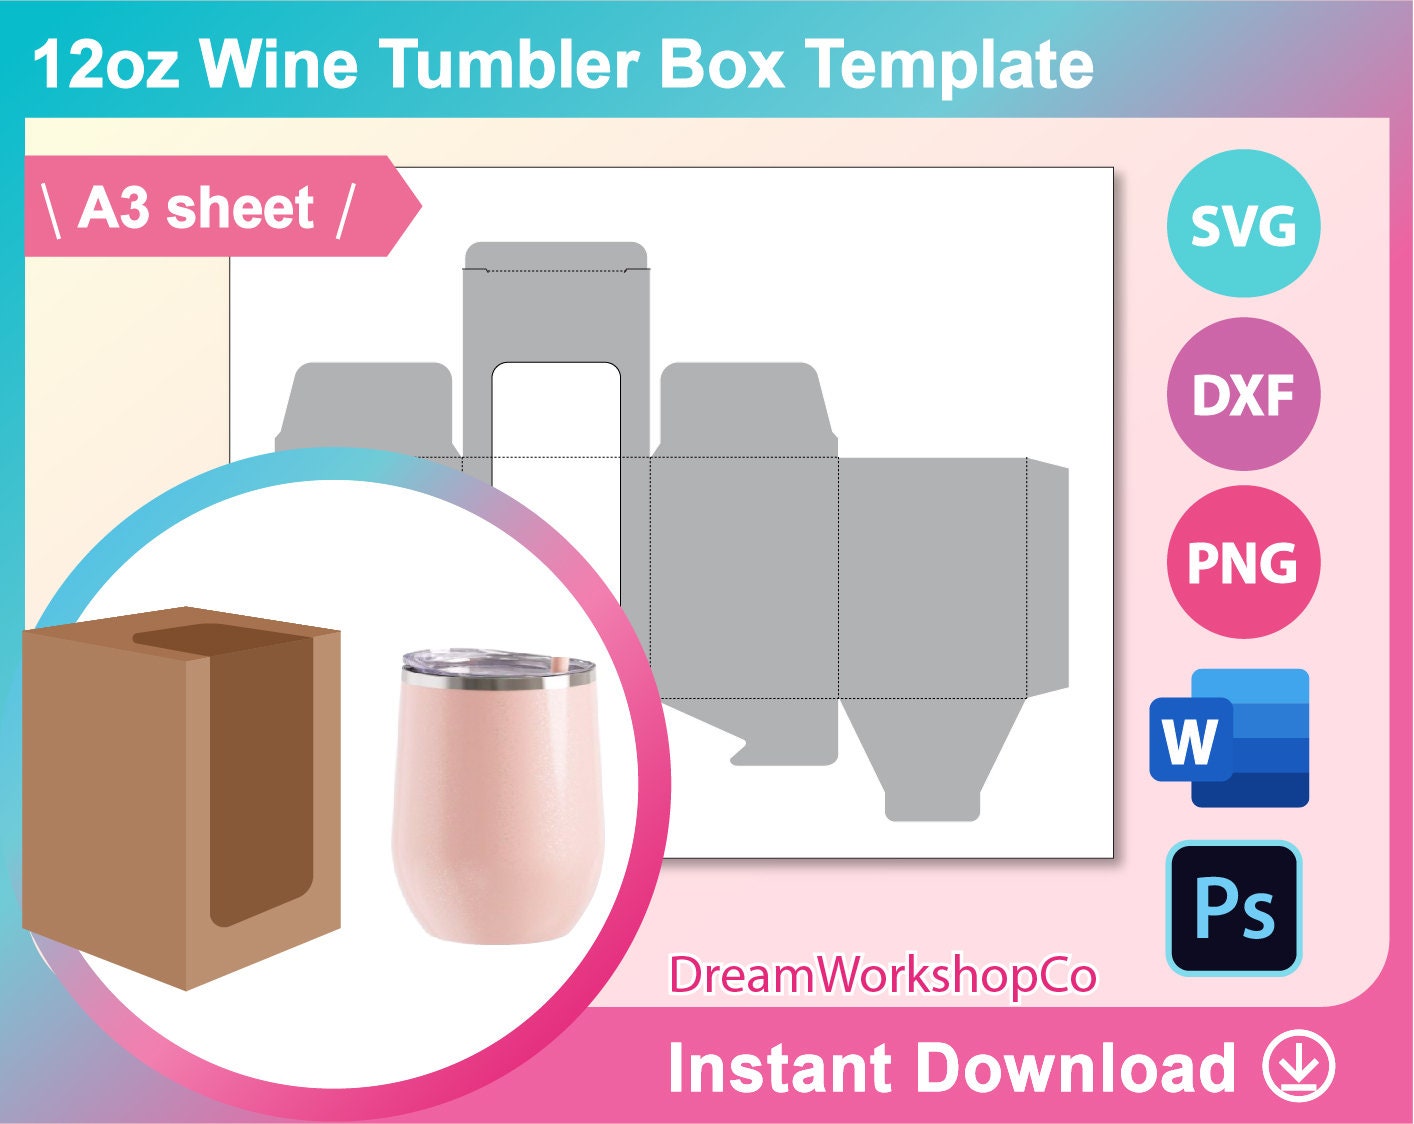 16oz Can Cooler Template, Beer Cooler Template, Sublimation Template, SVG,  DXF, Canva, DOCX, Png, Psd, 8.5x11 Sheet, Printable 